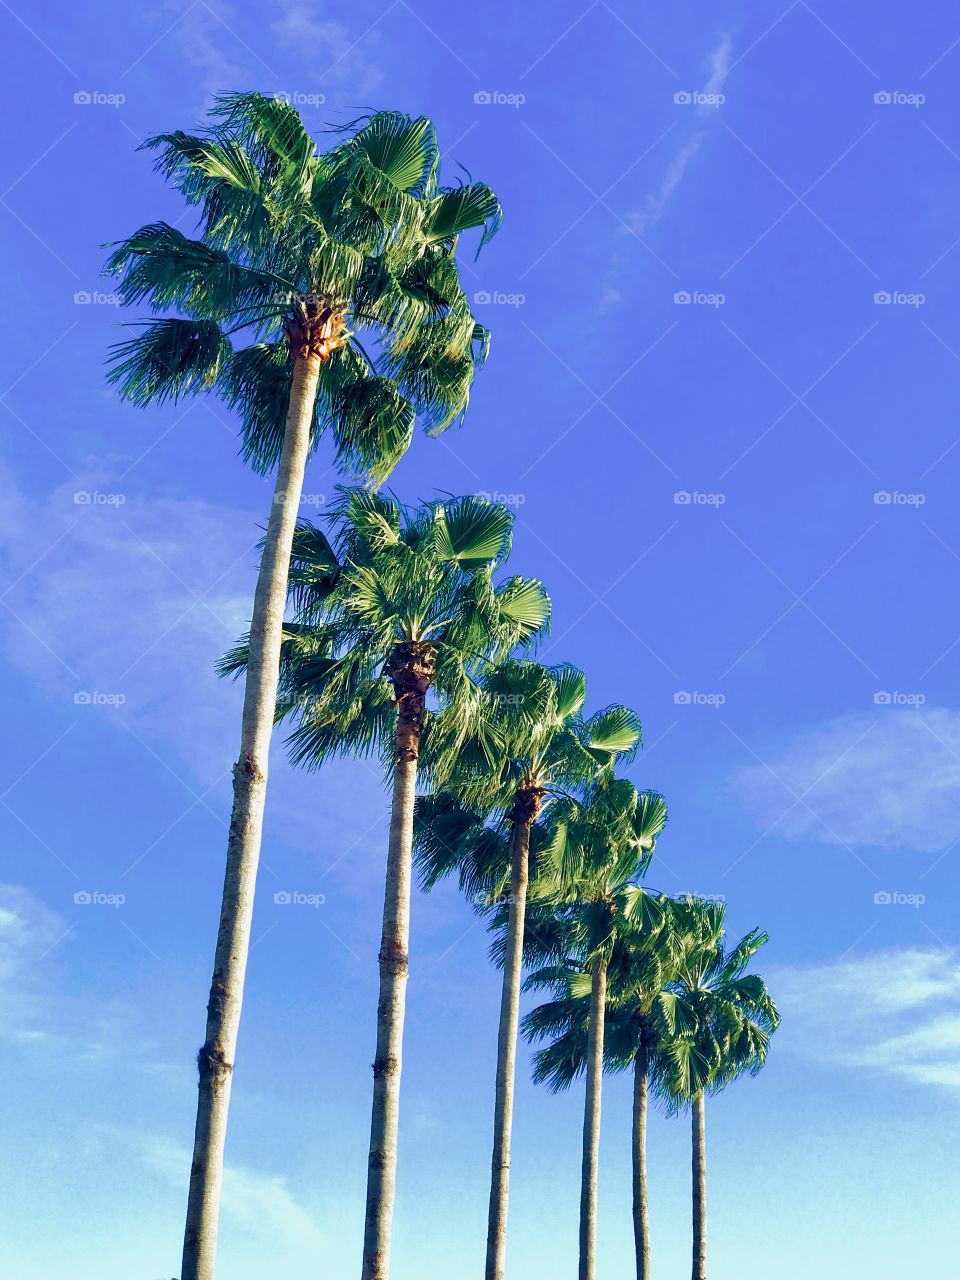 A lineup of palm trees bean blowing by the wind under a blue clean spring sky.